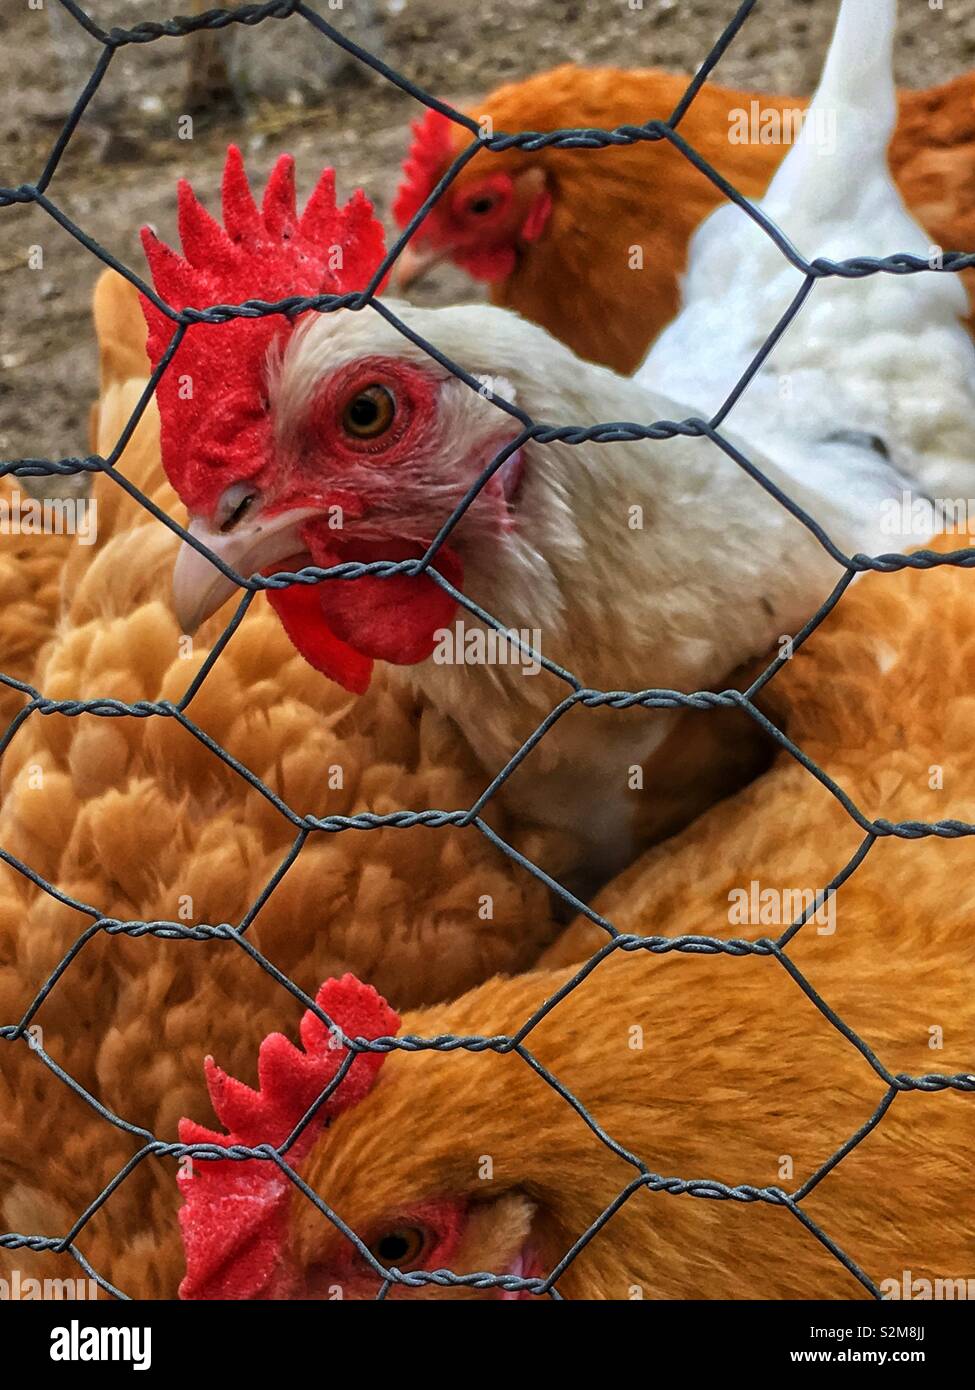 Free range white hen roaming around the chicken pen staring intently at the camera. Stock Photo